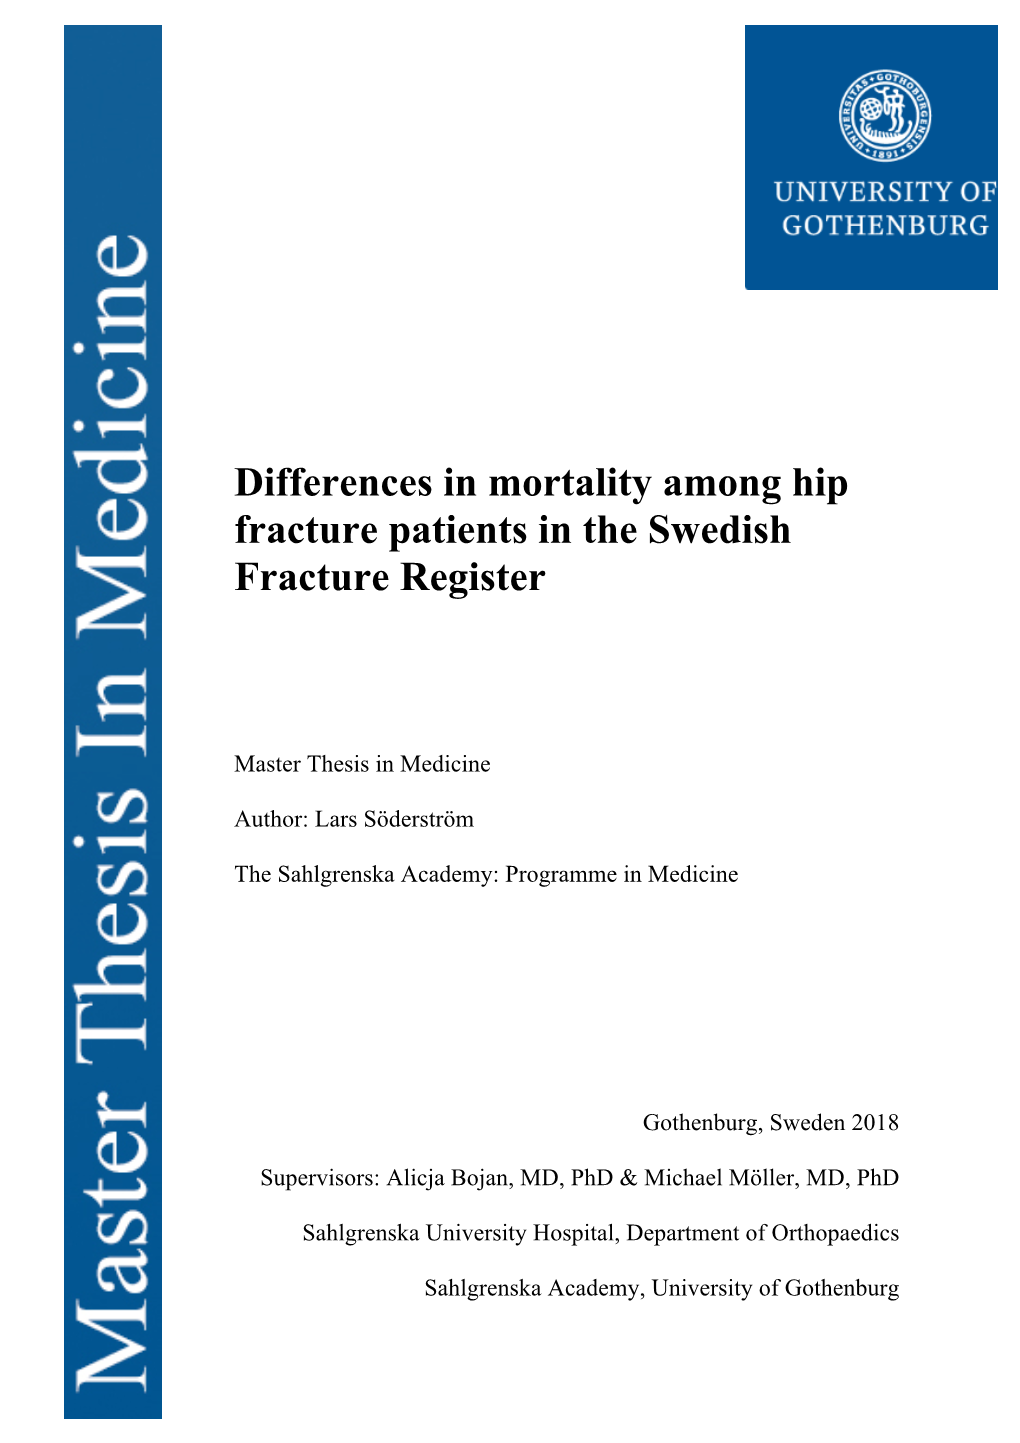 Differences in Mortality Among Hip Fracture Patients in the Swedish Fracture Register